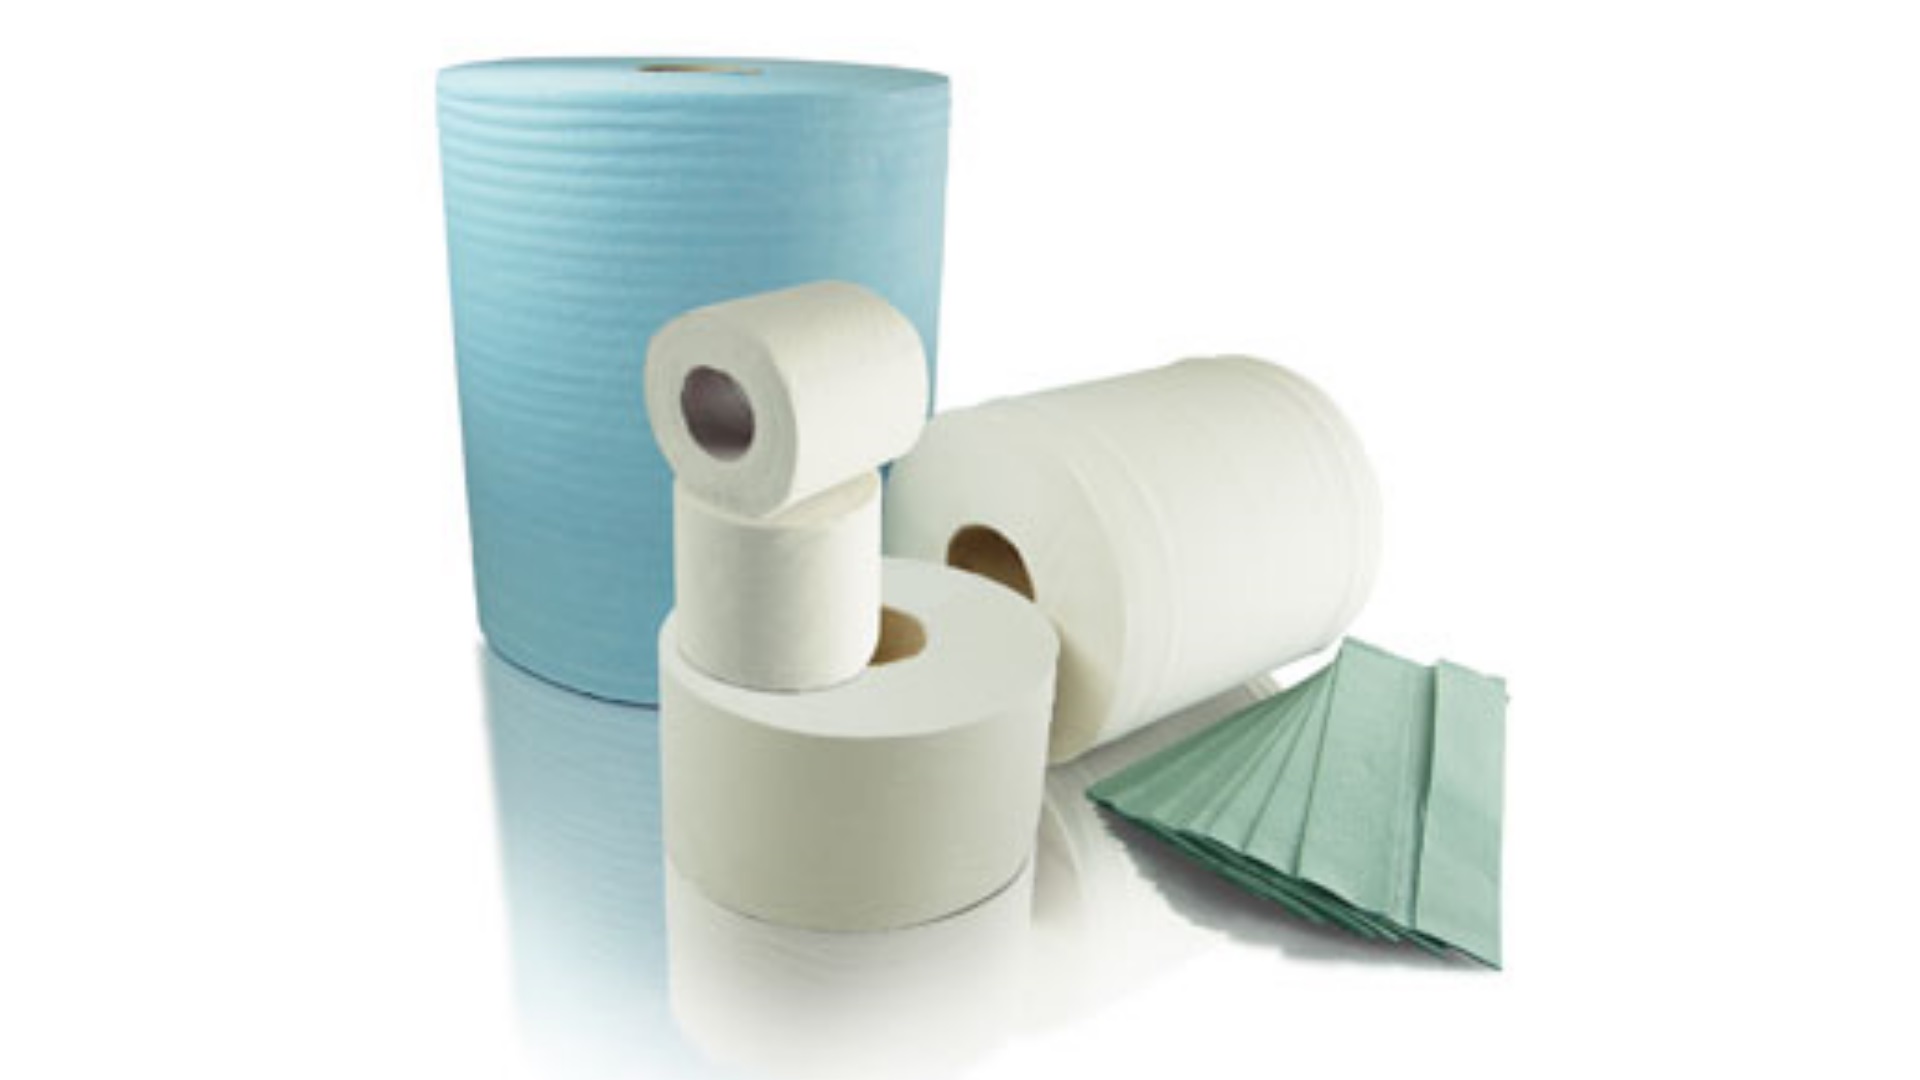 fpi-paper-products